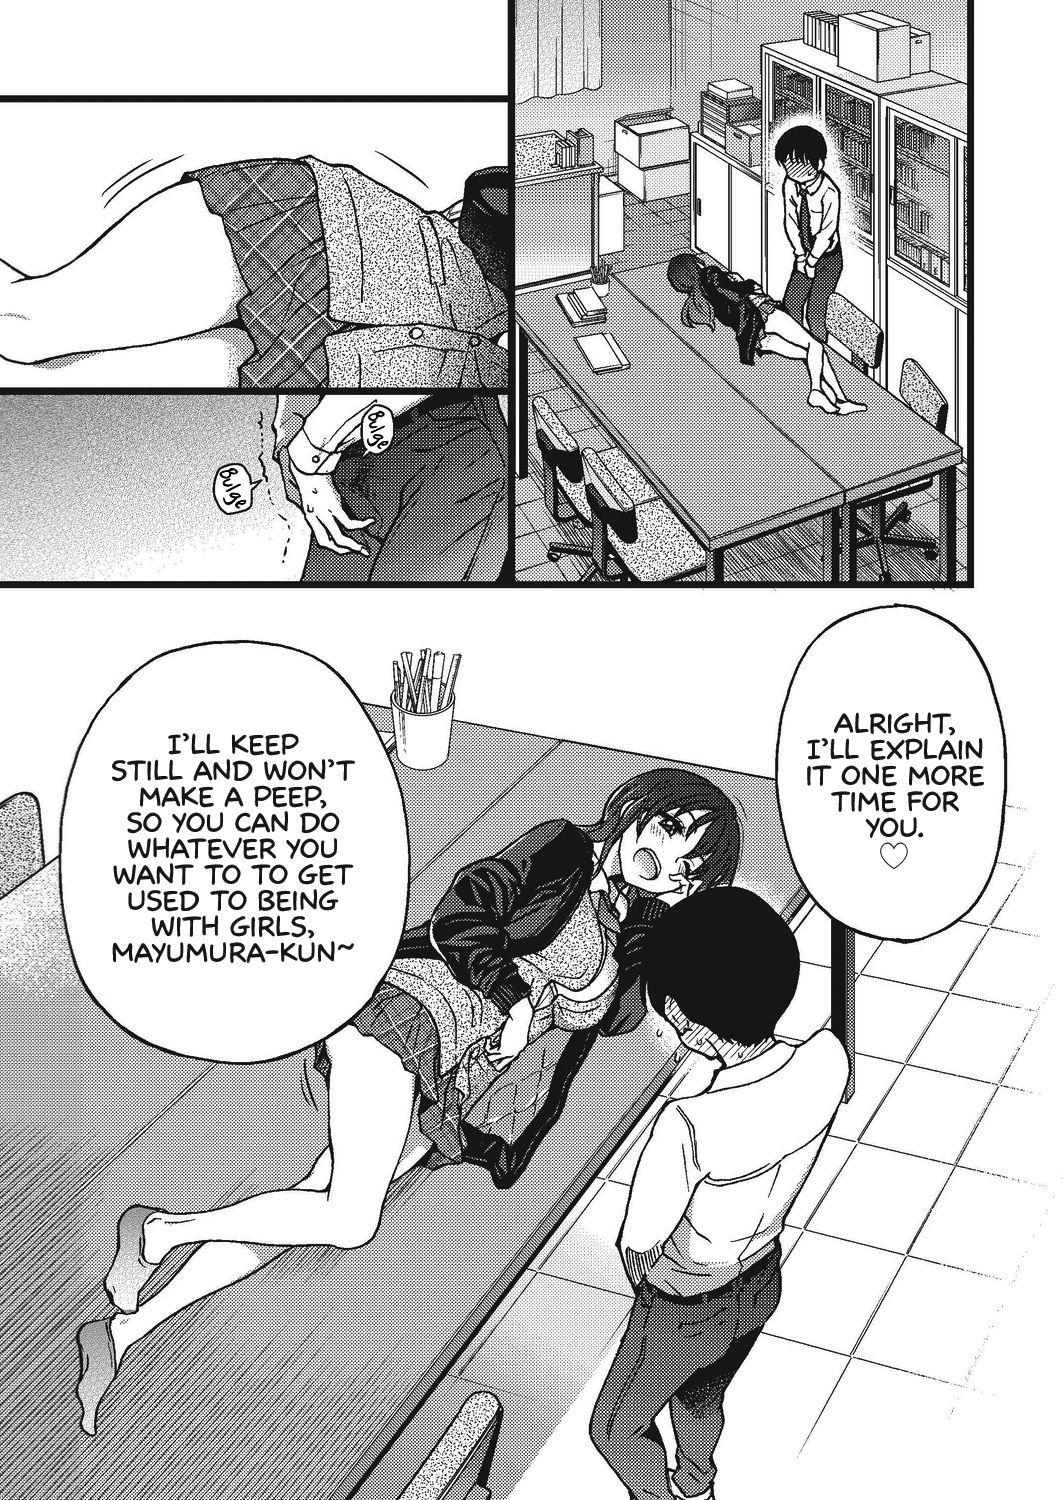 Lesbos Please! Freeze! Please! #3 Anime - Page 3